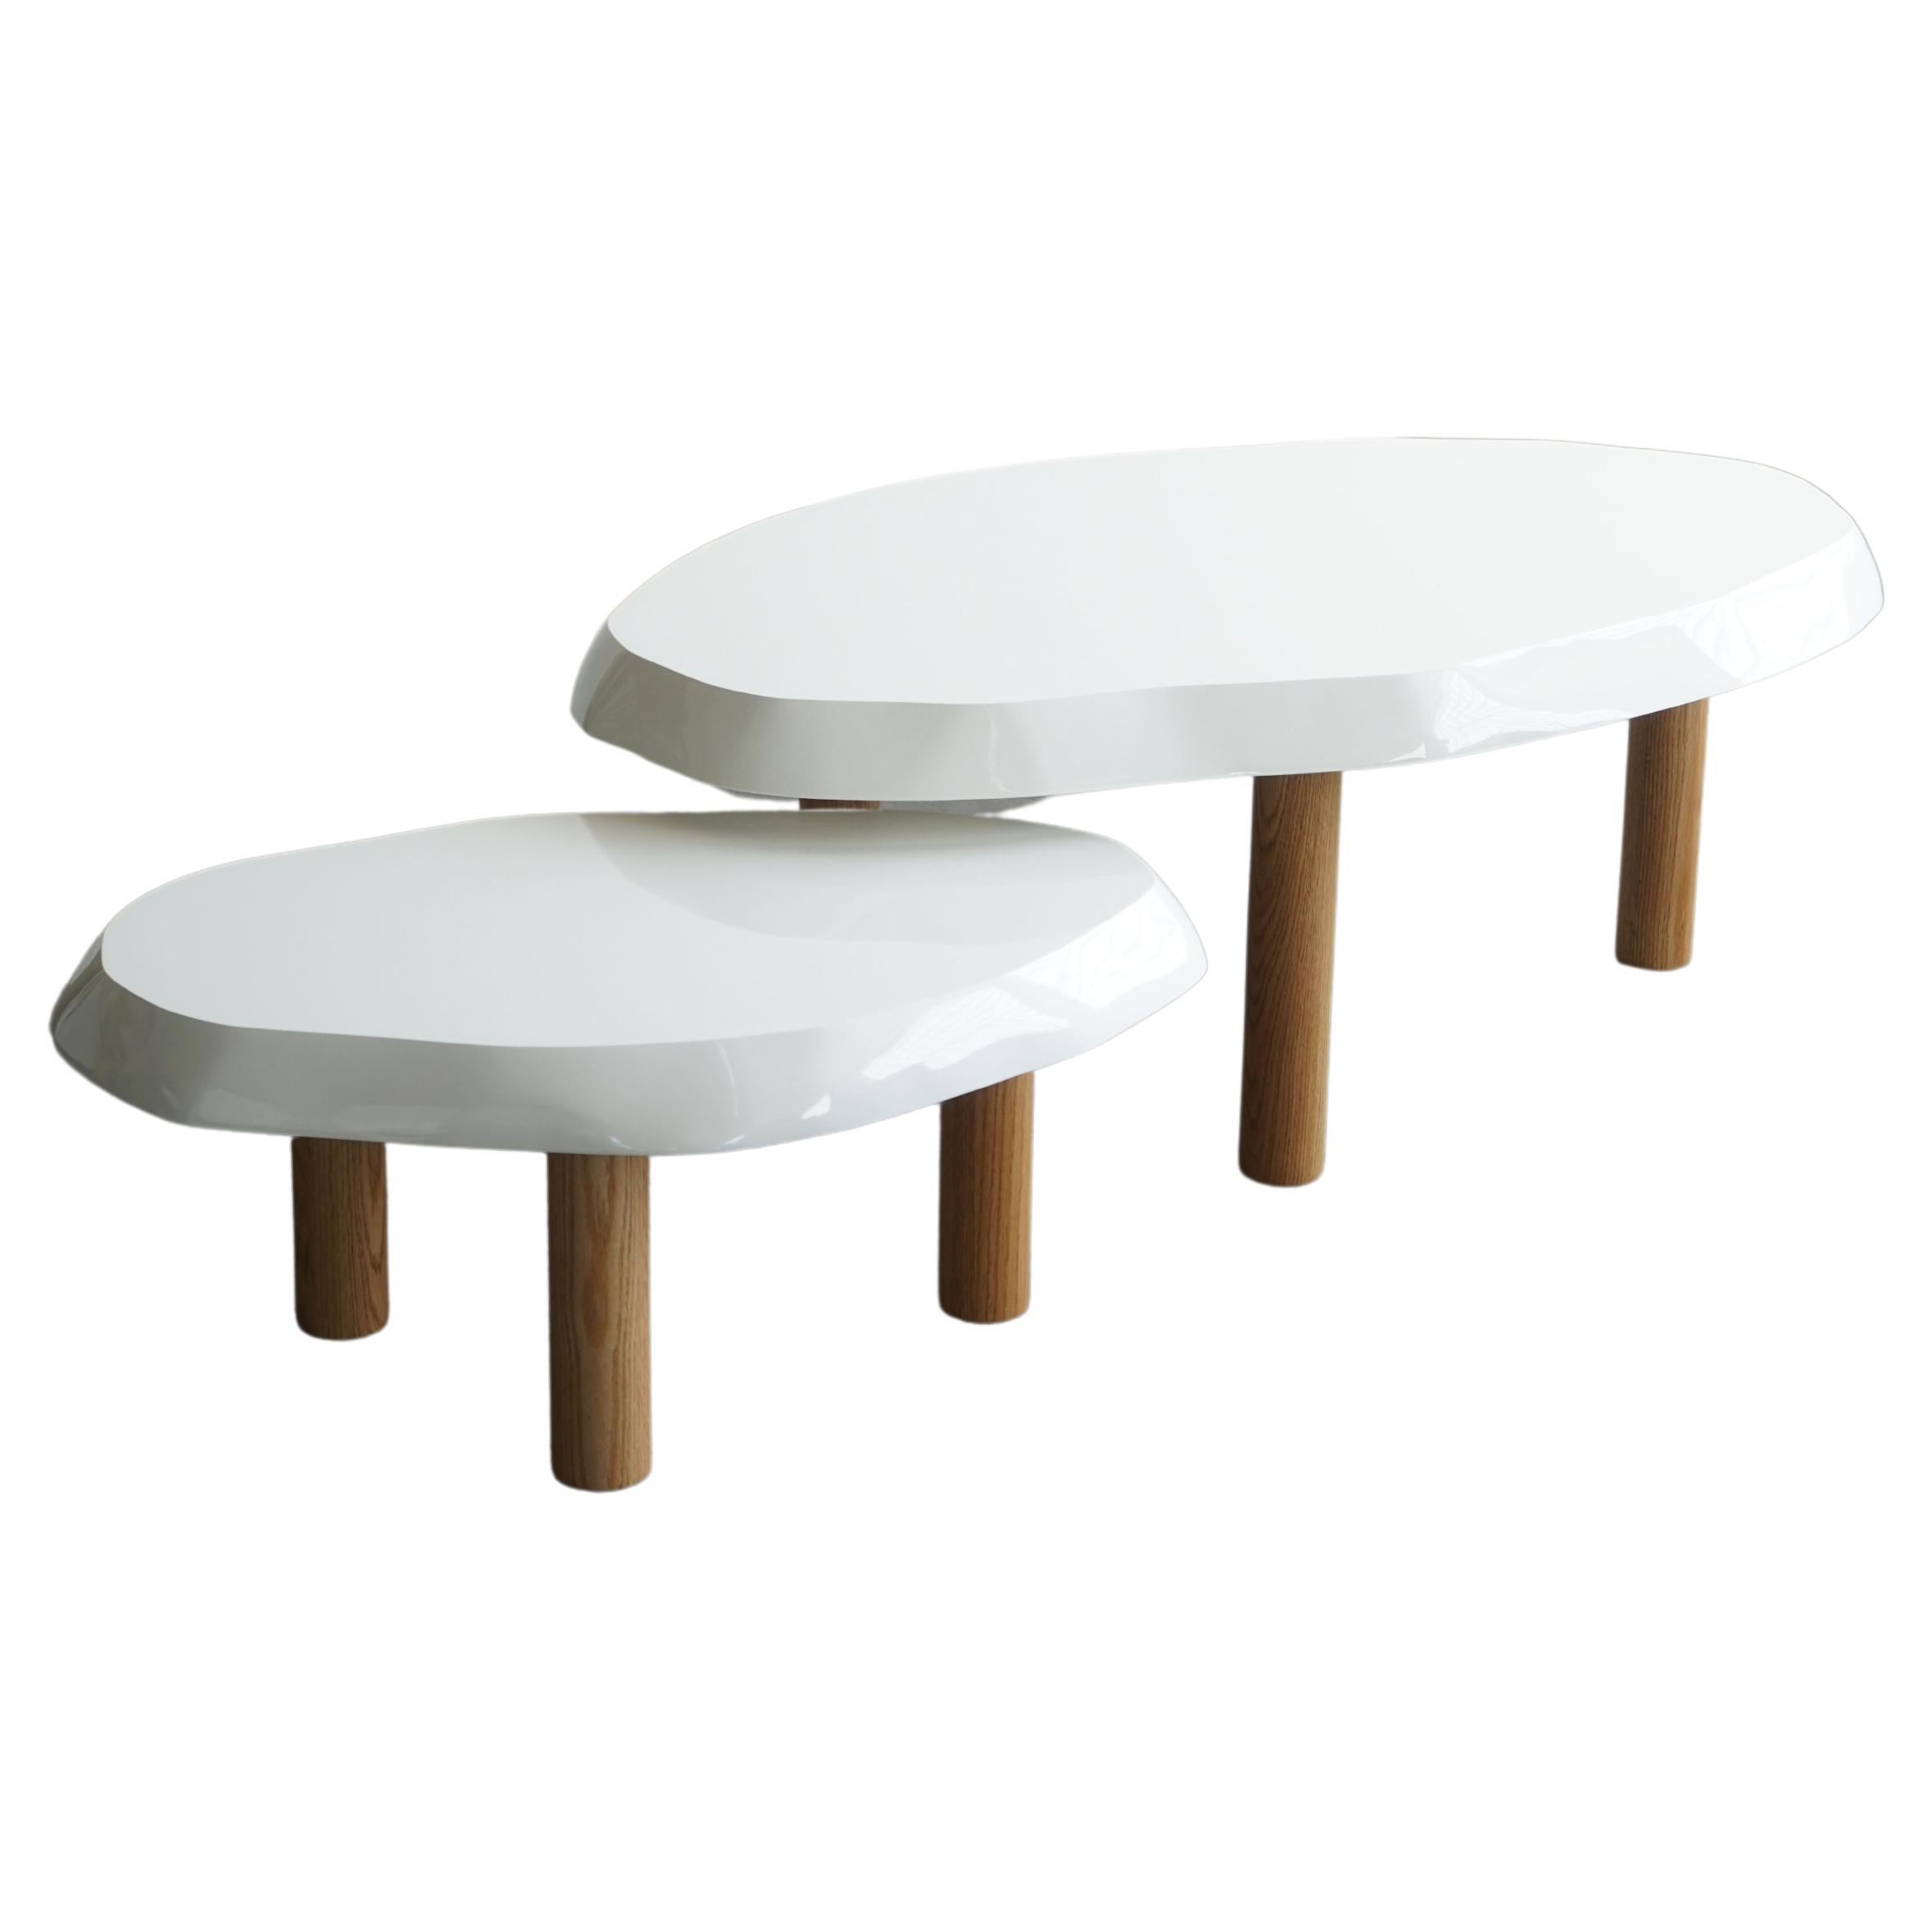 Set of 2 organic shaped modern nesting coffee tables by Last Workshop lacquered  For Sale